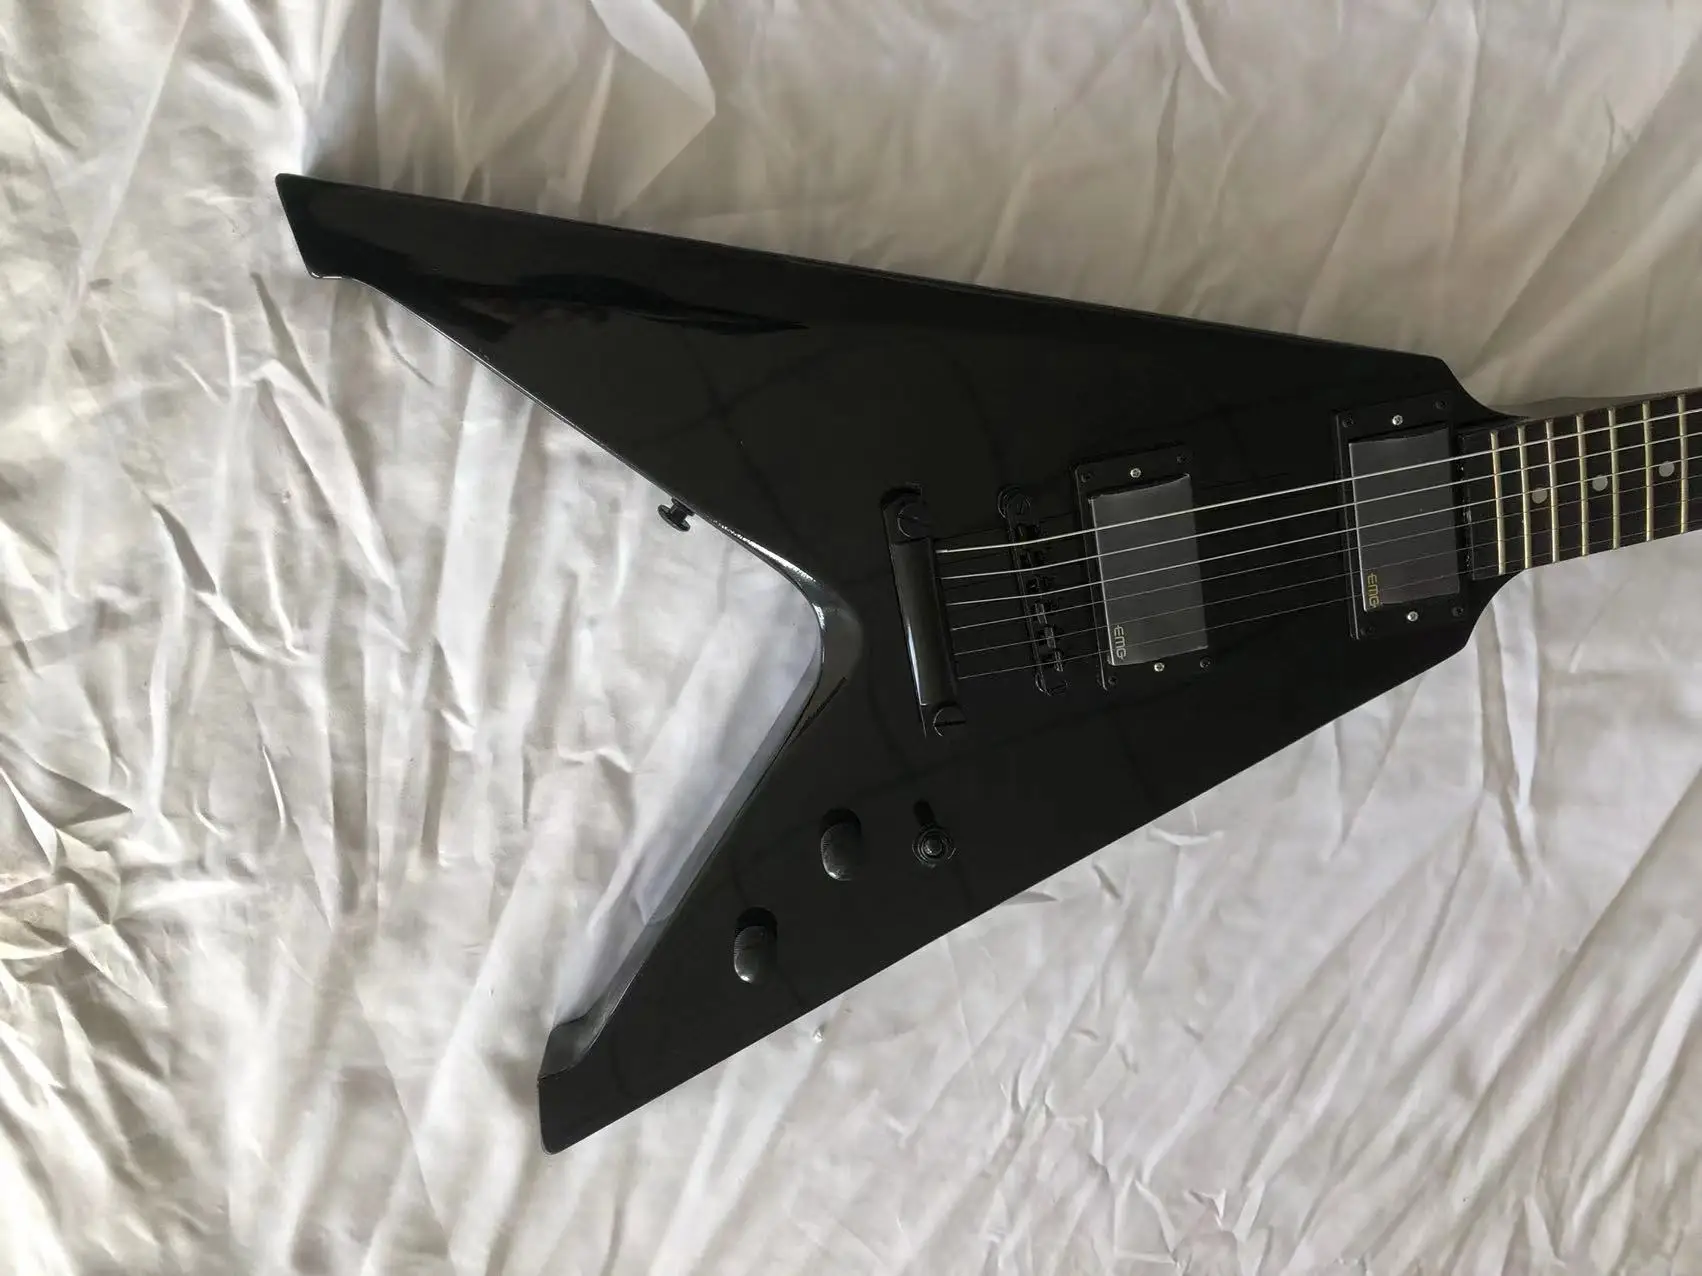 

Oem Black 6 Strings Electric Guitar Mahogany Body And Neck Inlays Bat EMG Pickup Glossy Finish Free Delivery